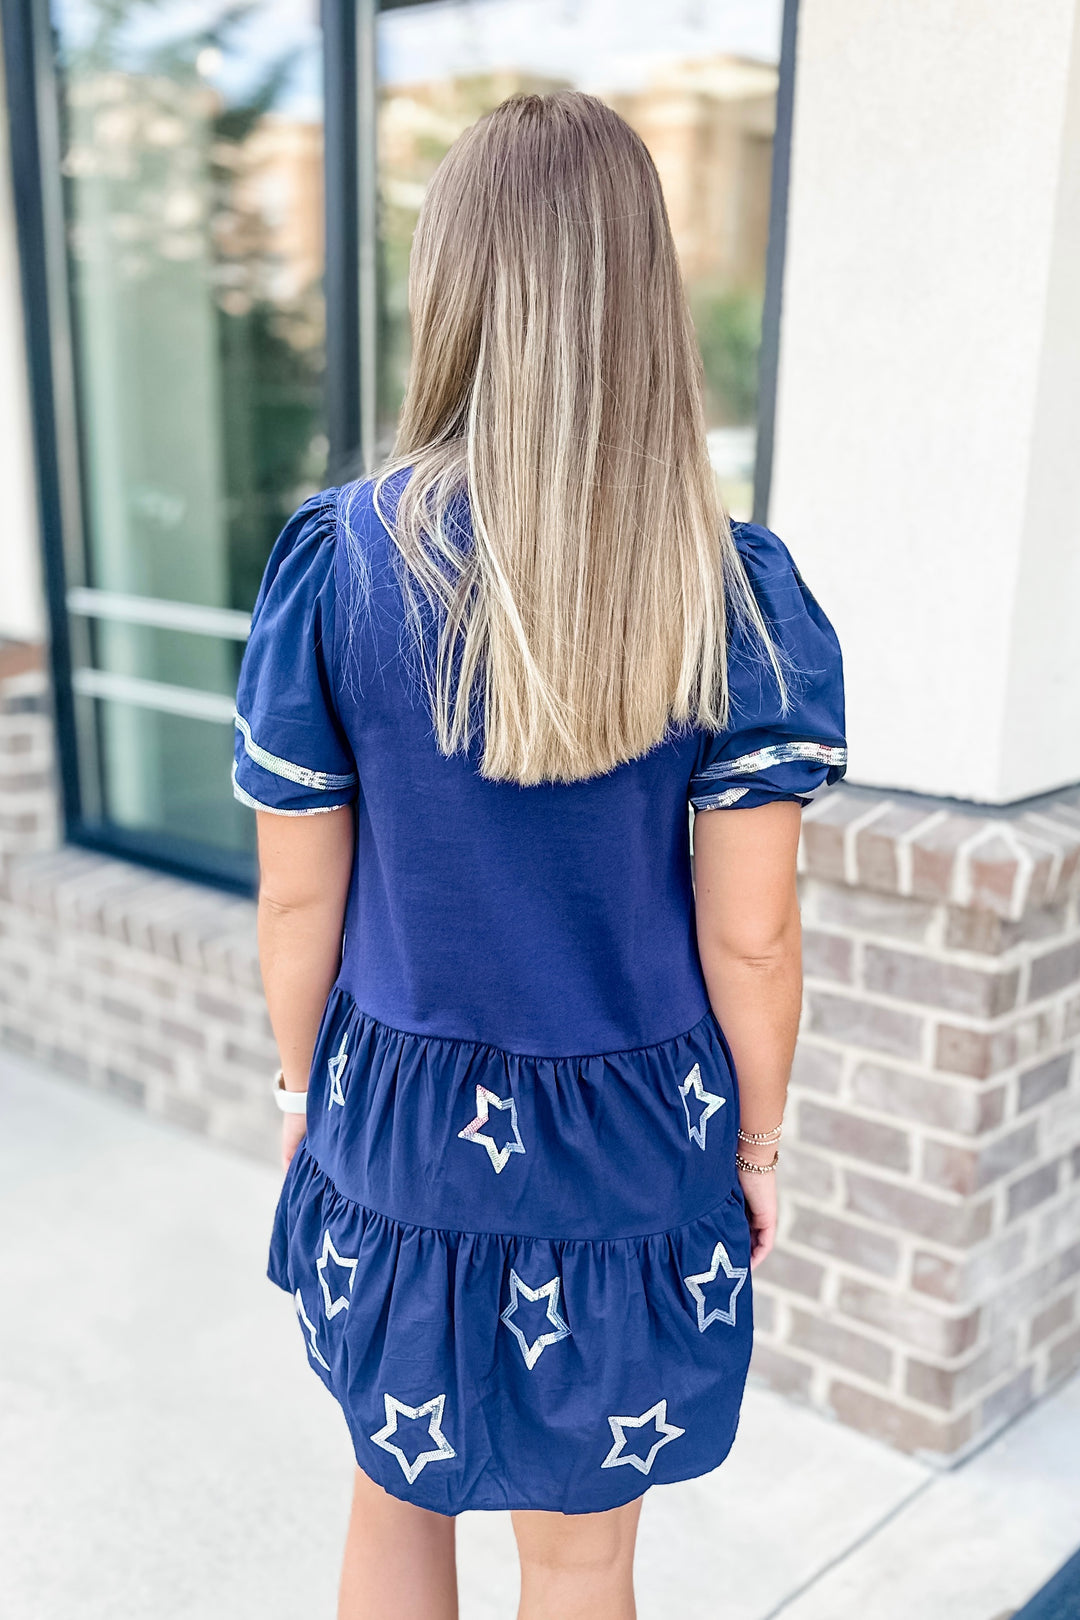 NAVY & SILVER SEQUIN GAME DAY DRESS